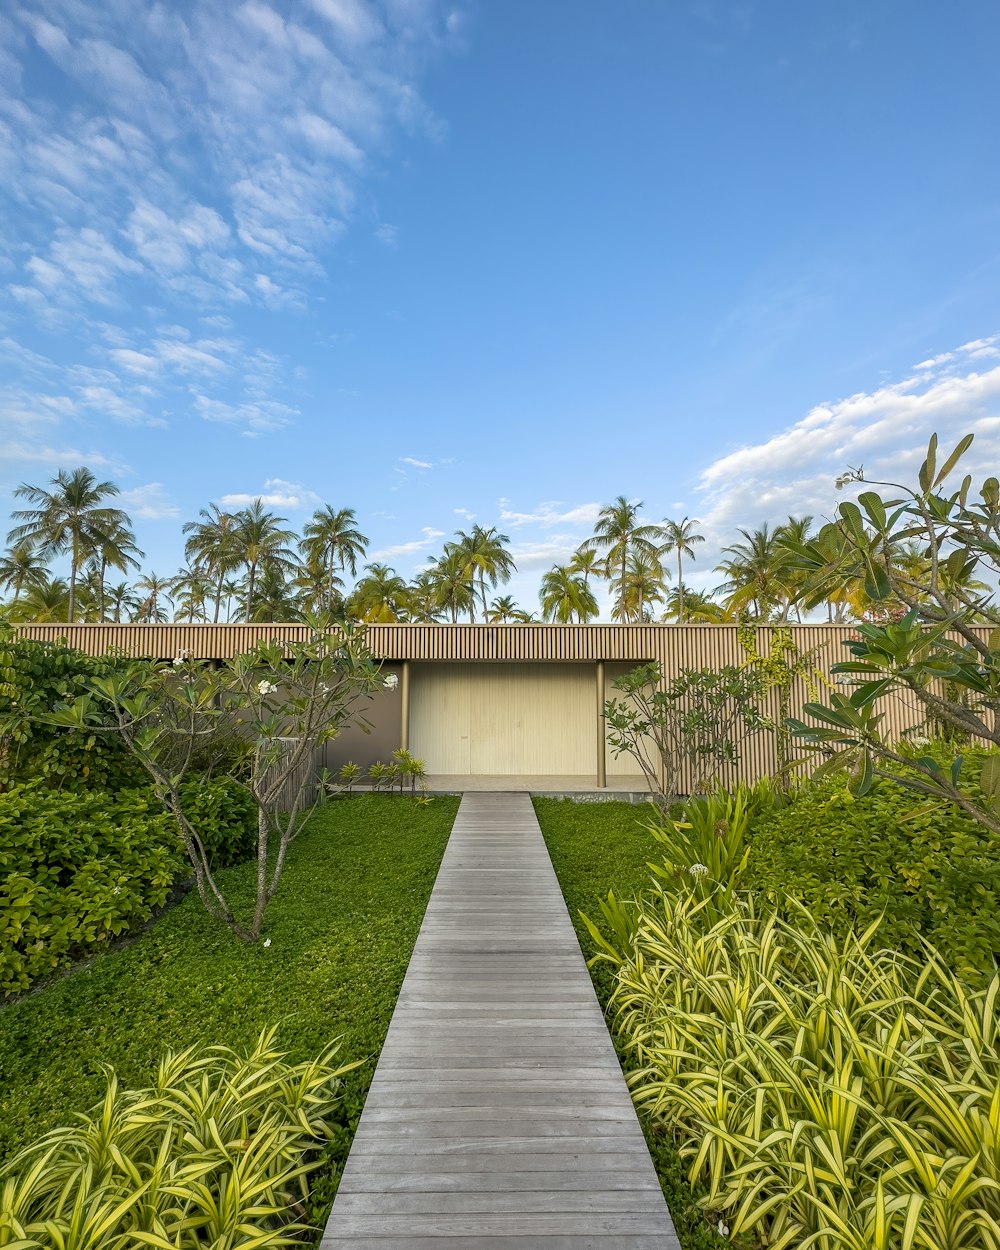 a walkway leading to a house surrounded by palm trees